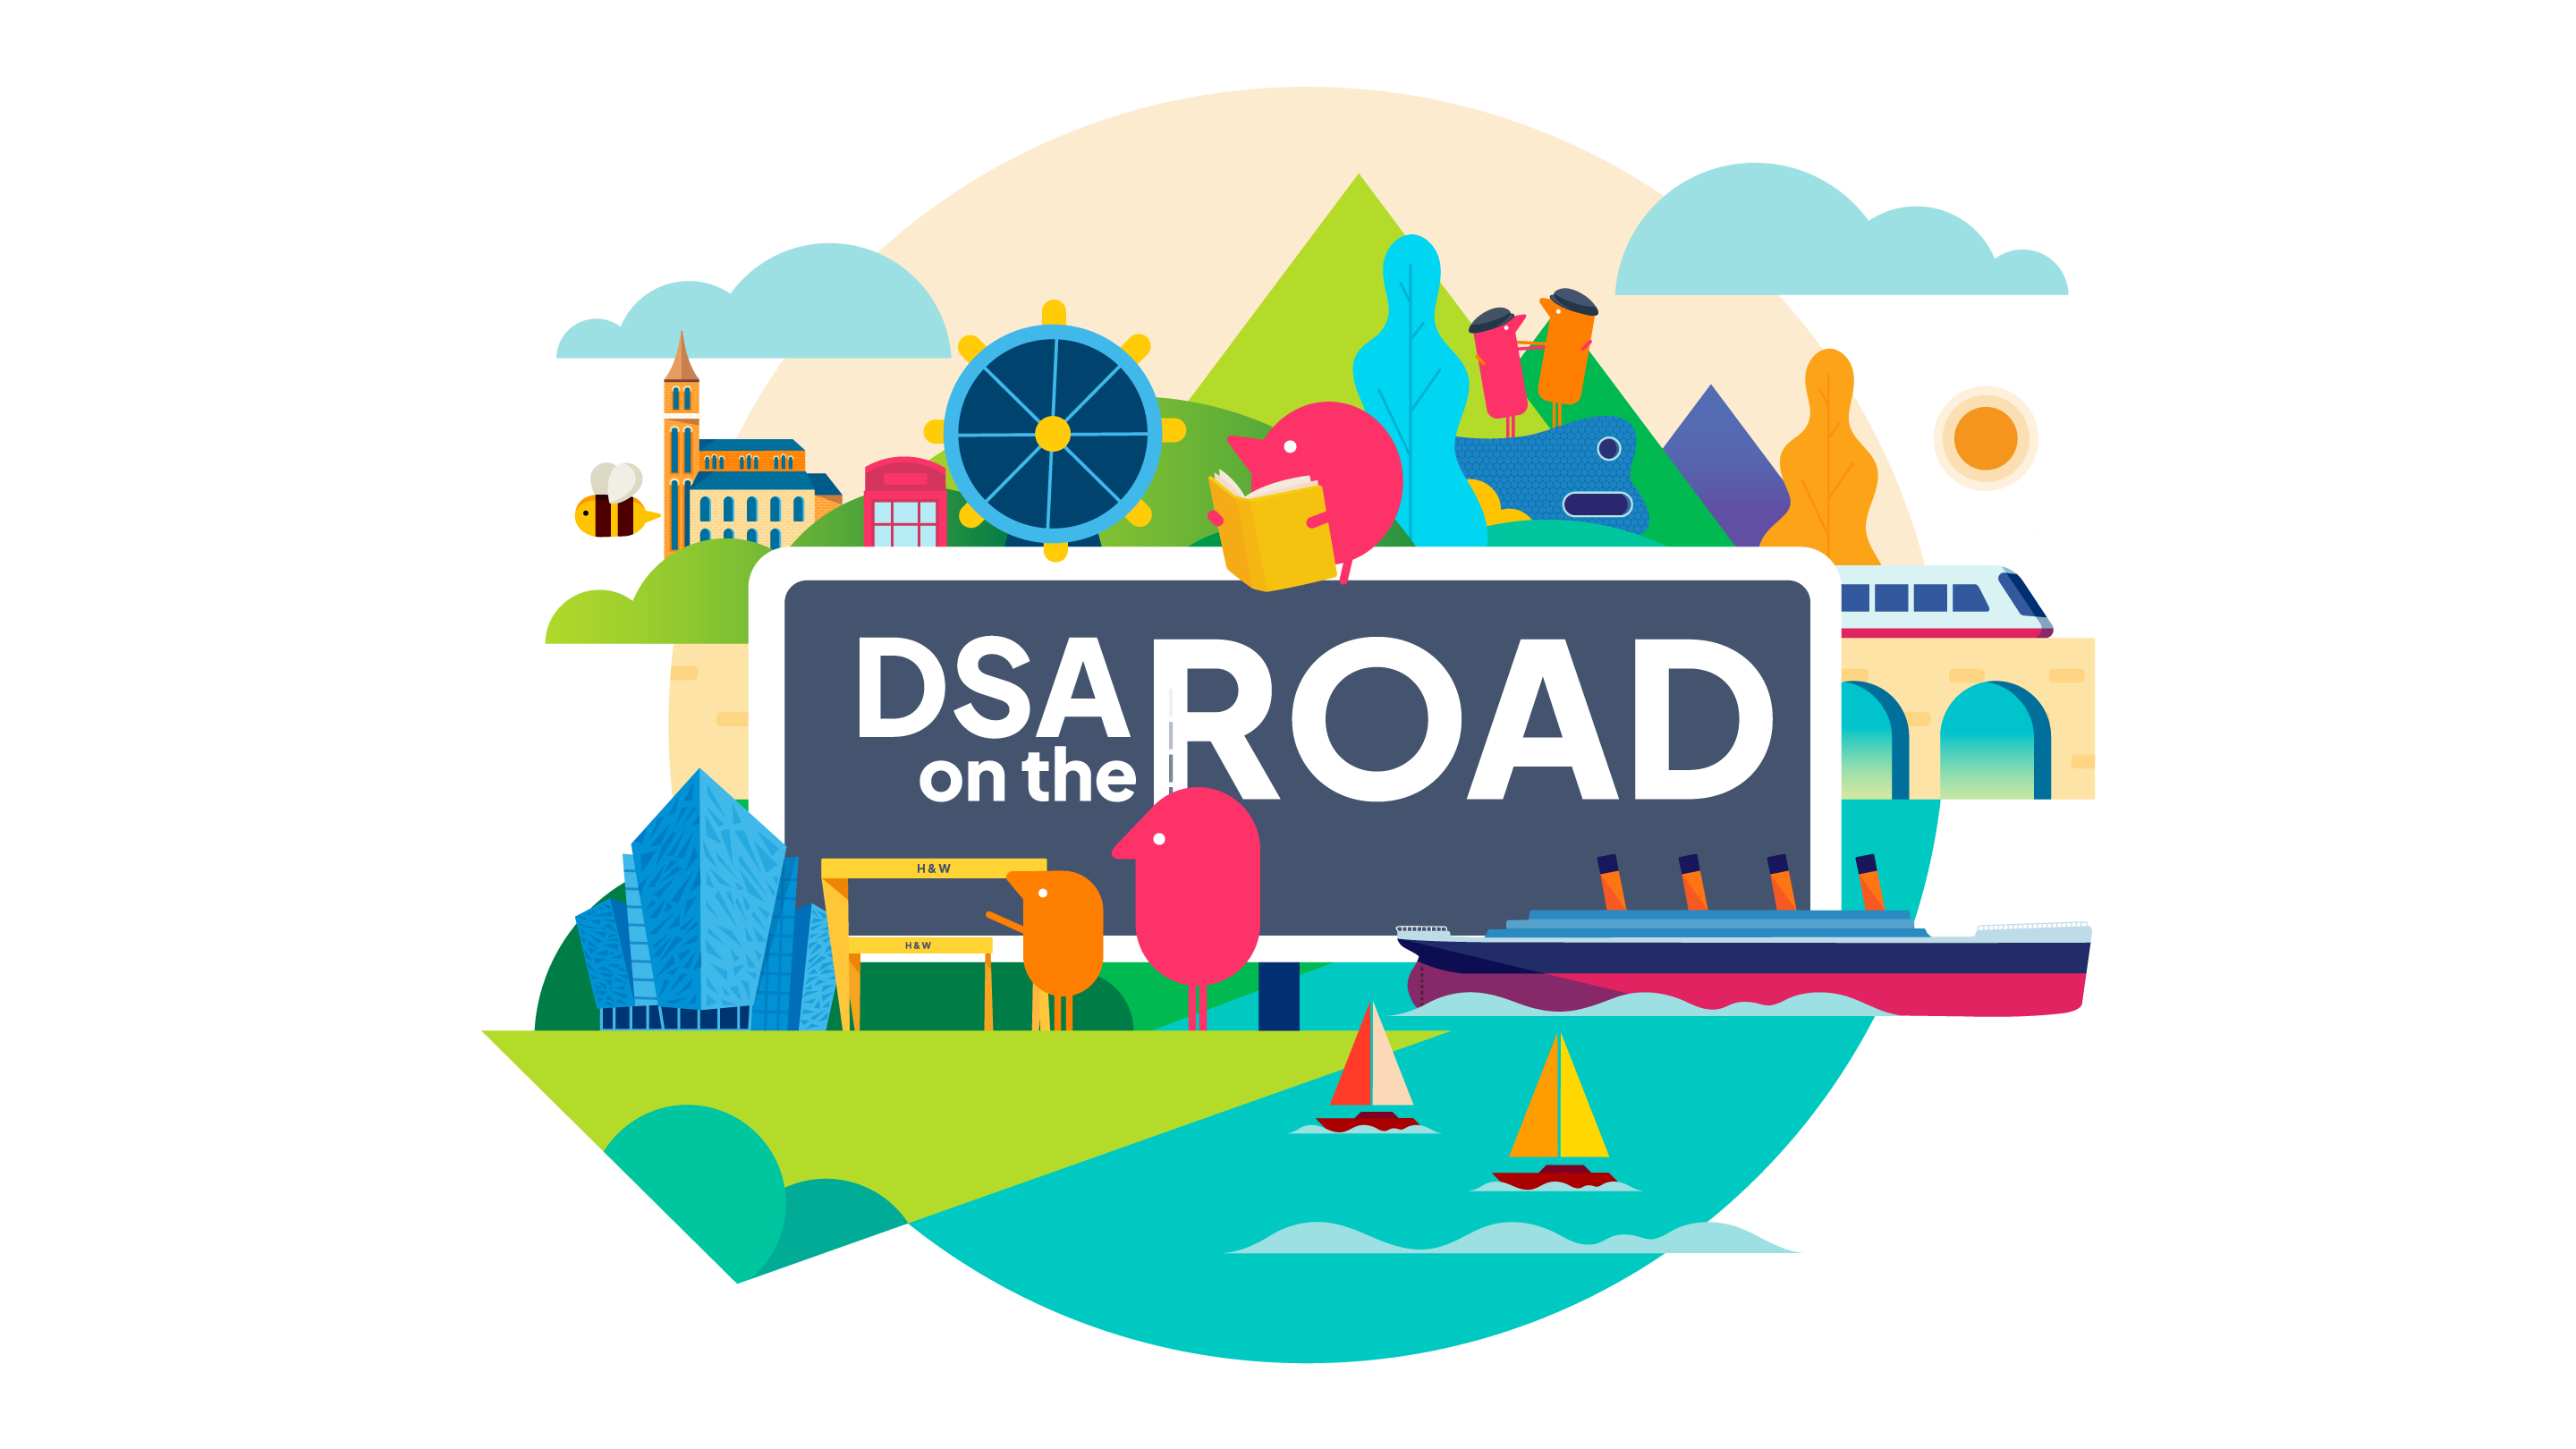 DSA On the Road logo. Cityscape featuring landmarks in London, Manchester, Belfast, Birmingham and Glasgow